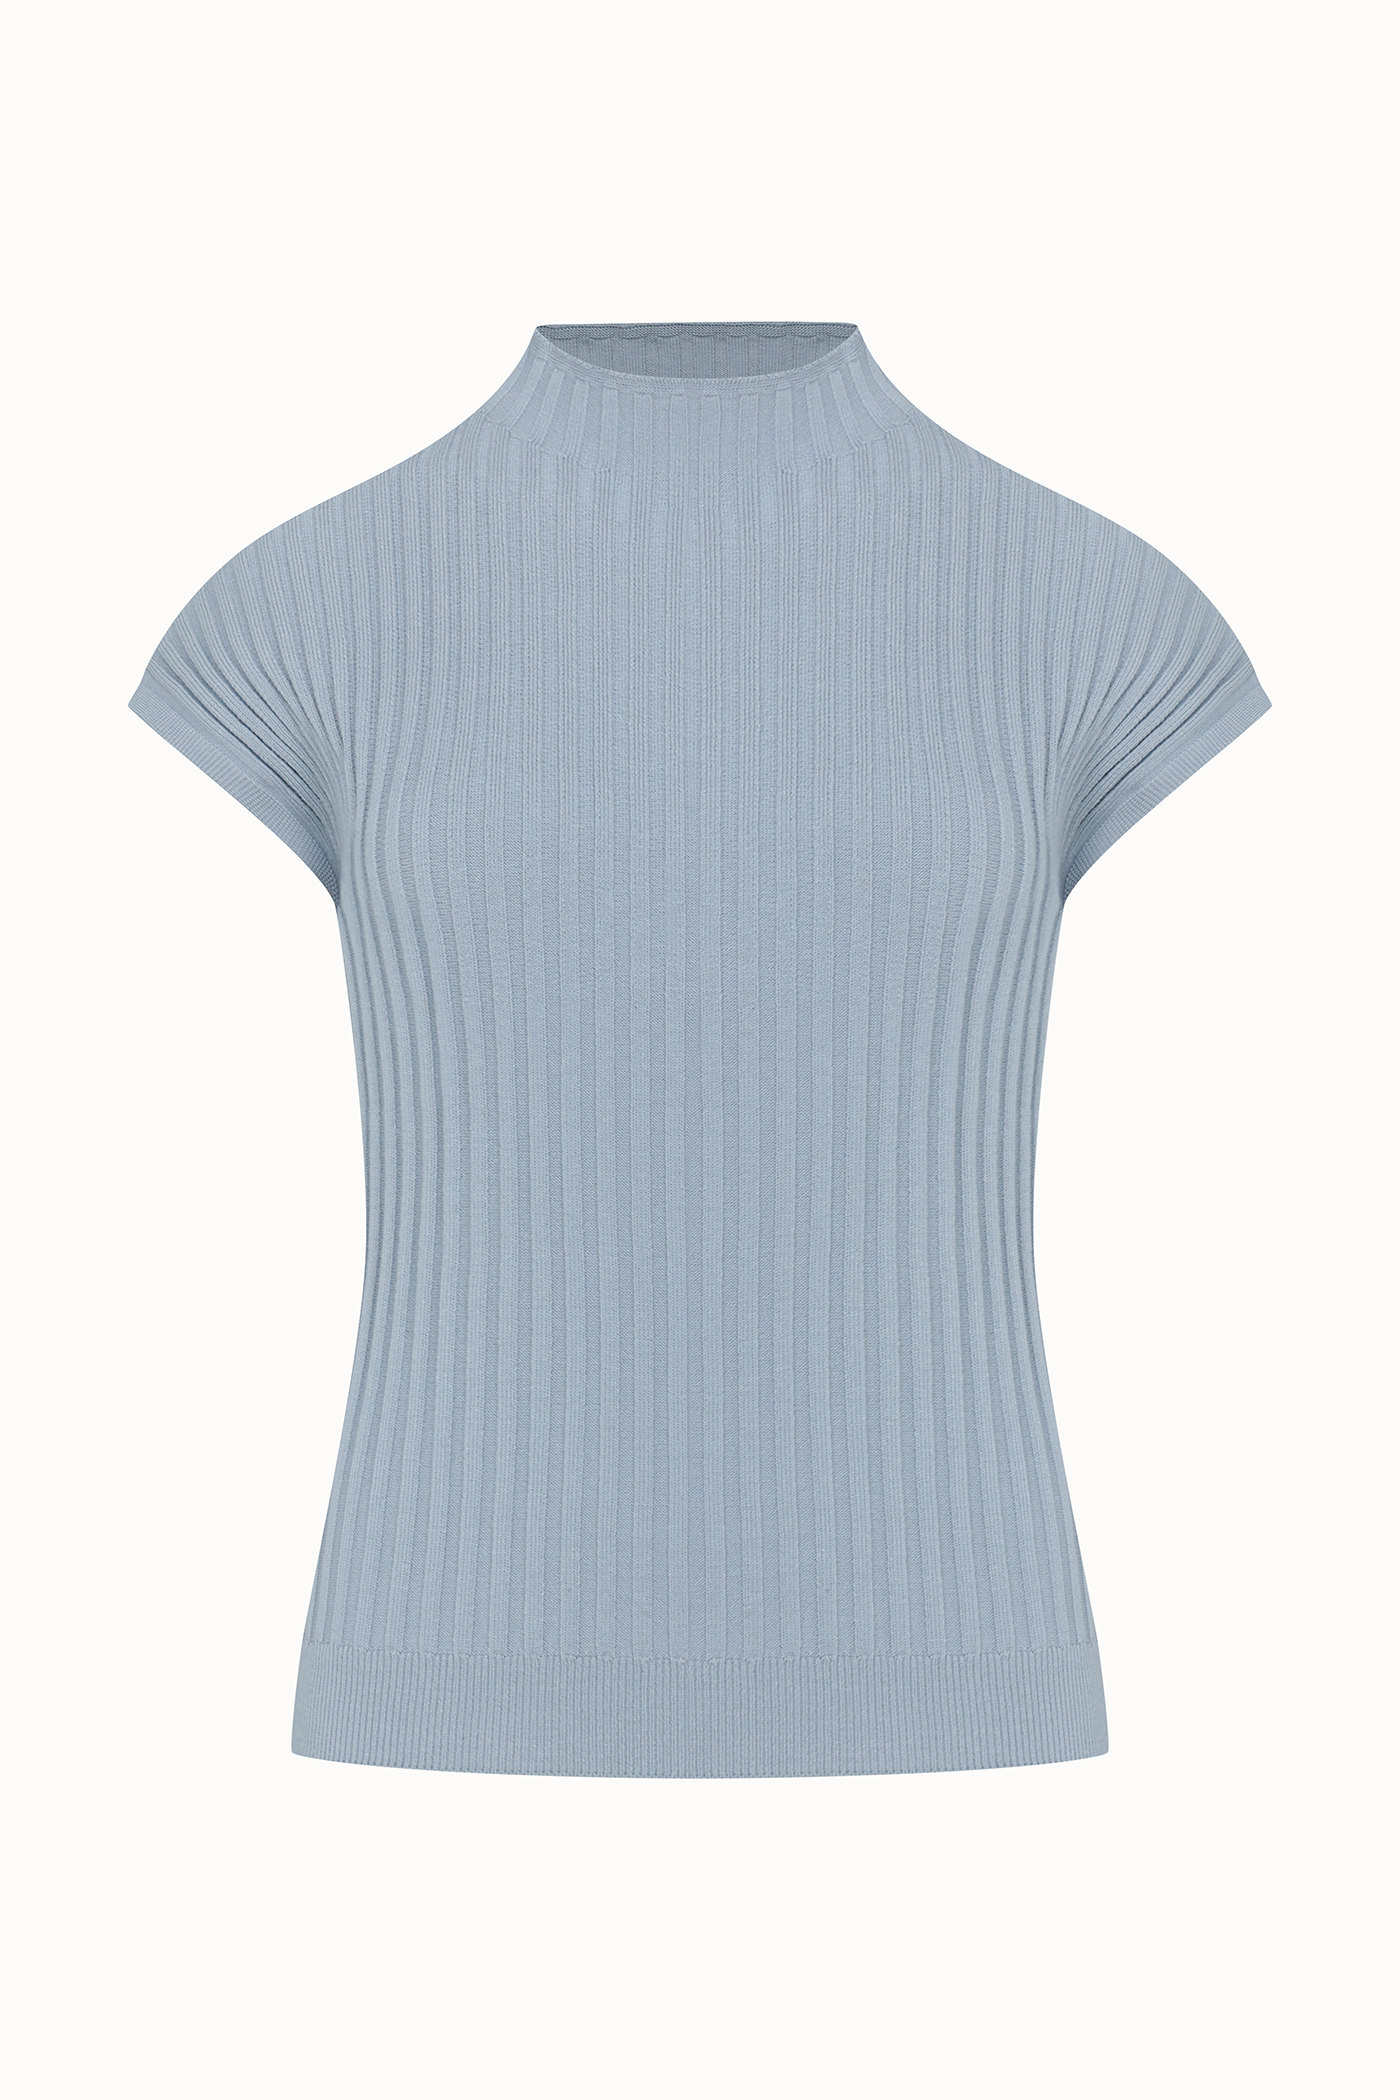 High Neck Ribbed Cap Sleeves[LMBDSPKN244]-Pearl Blue